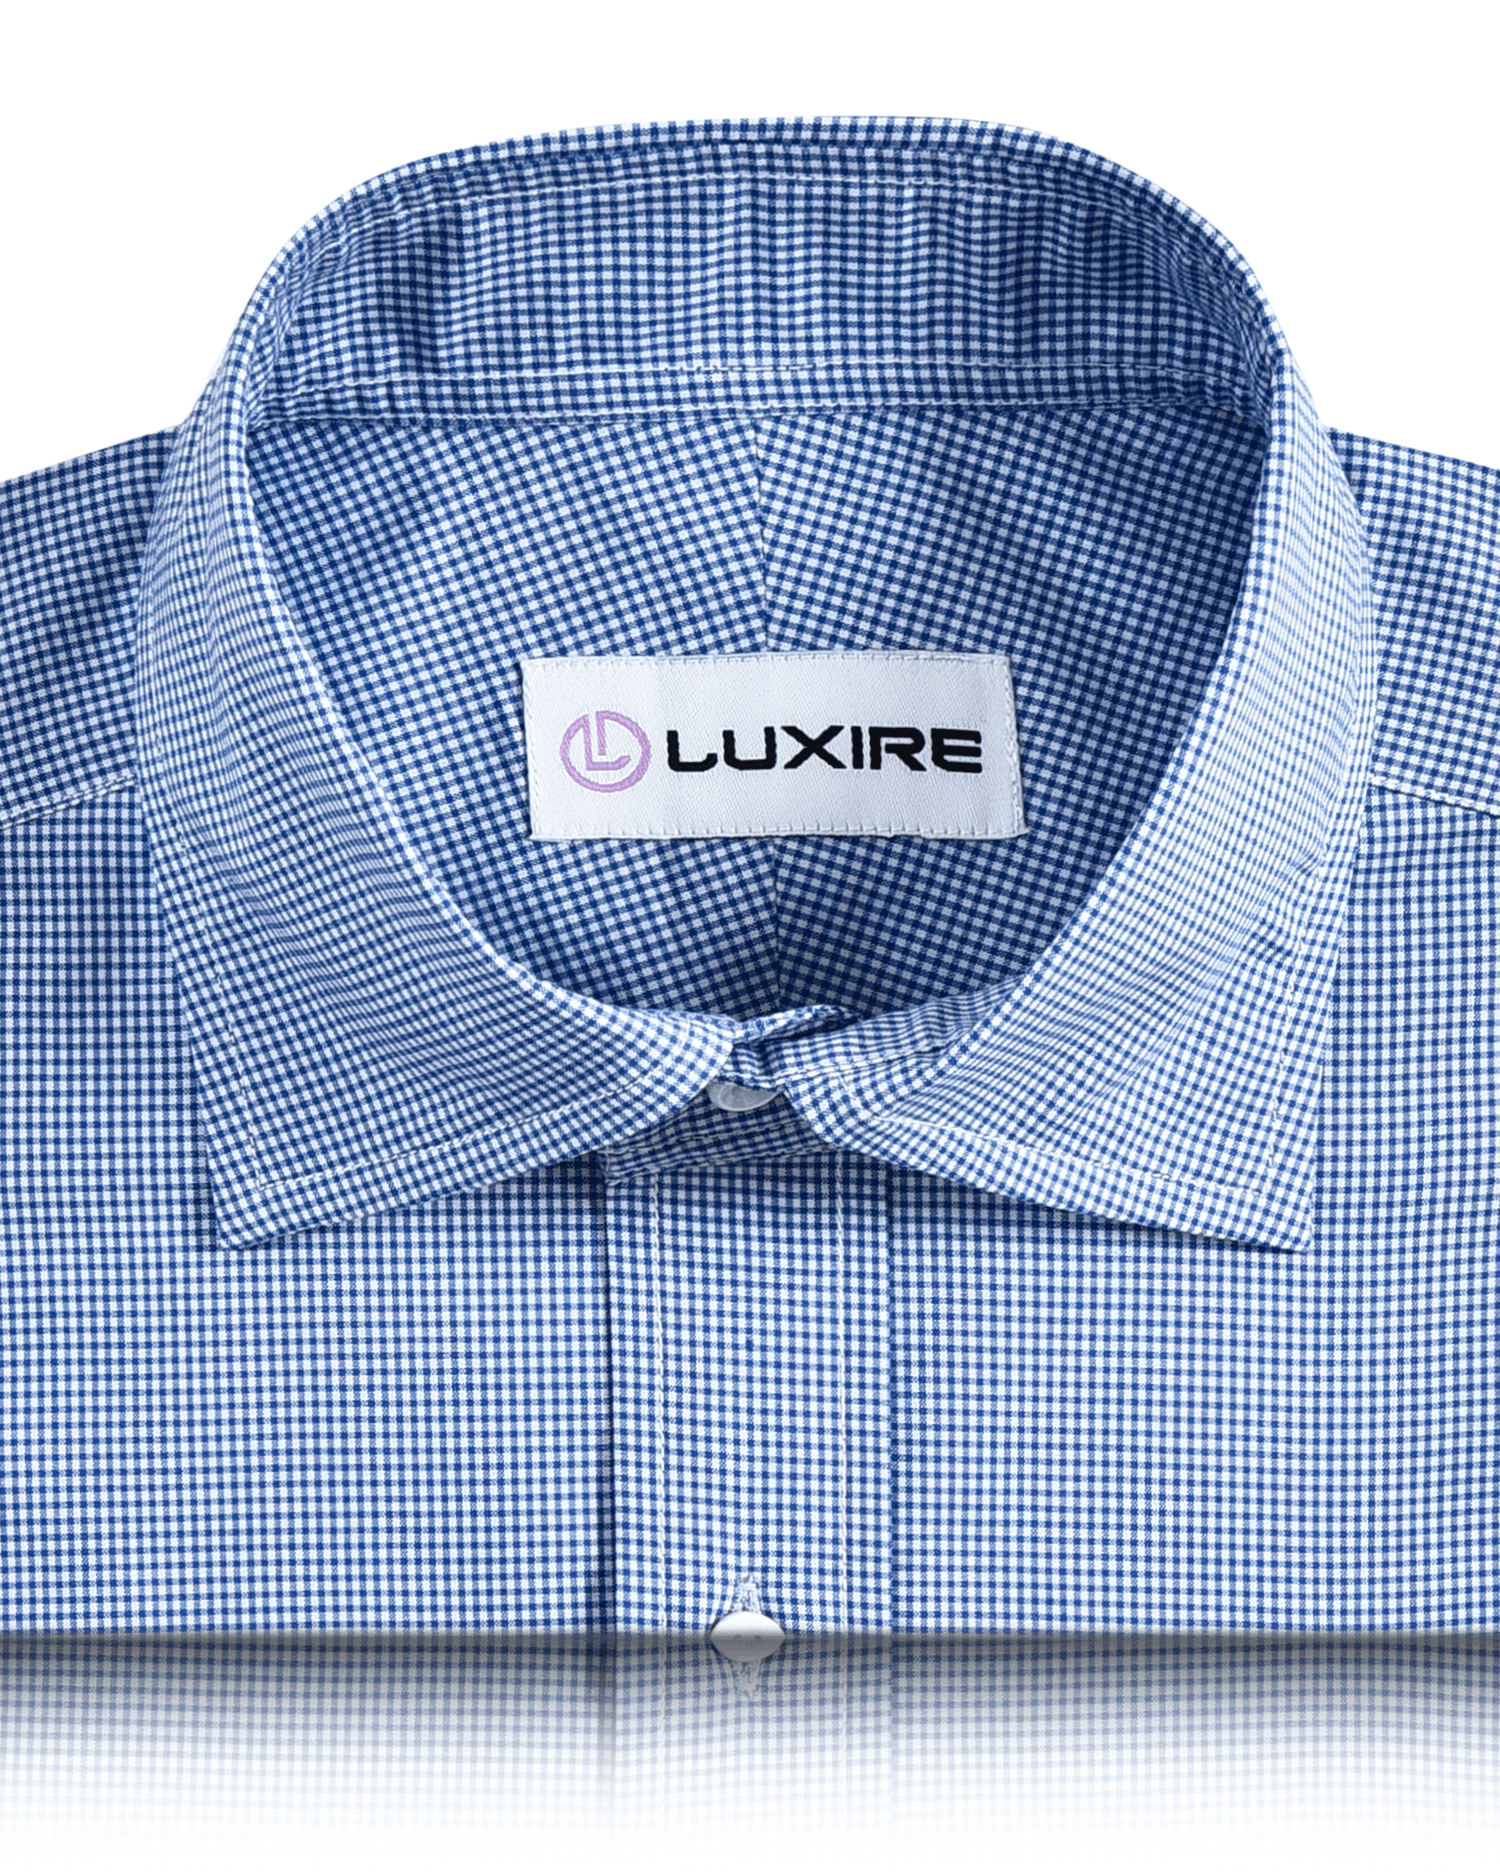 Front close view of custom check shirts for men by Luxire blue micro gingham